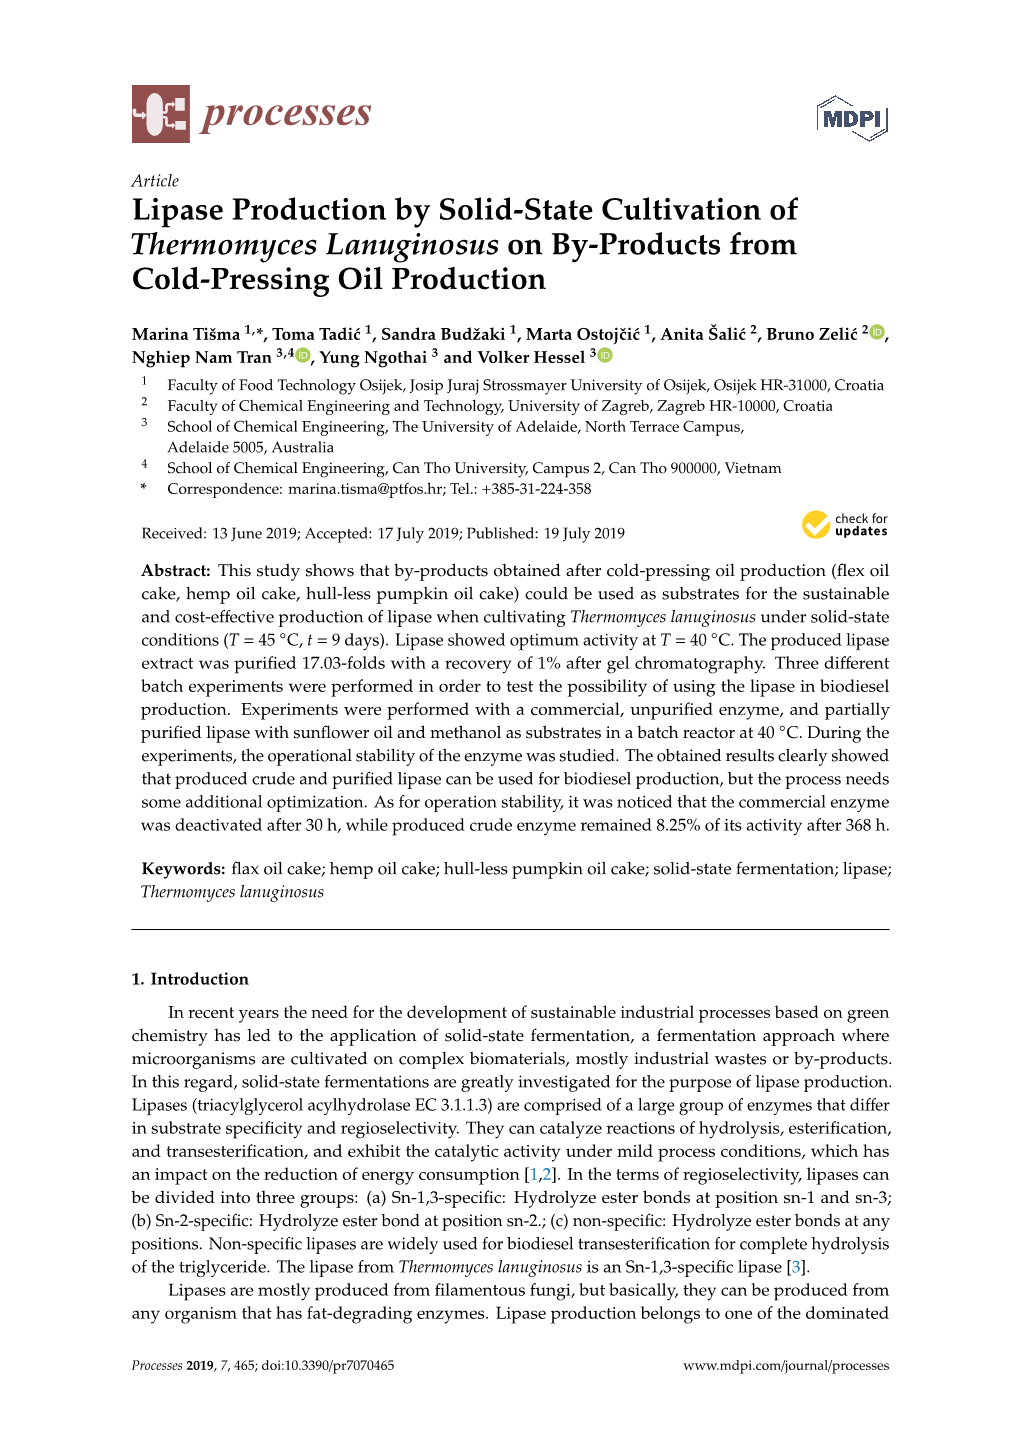 Lipase Production by Solid-State Cultivation of Thermomyces Lanuginosus on By-Products from Cold-Pressing Oil Production